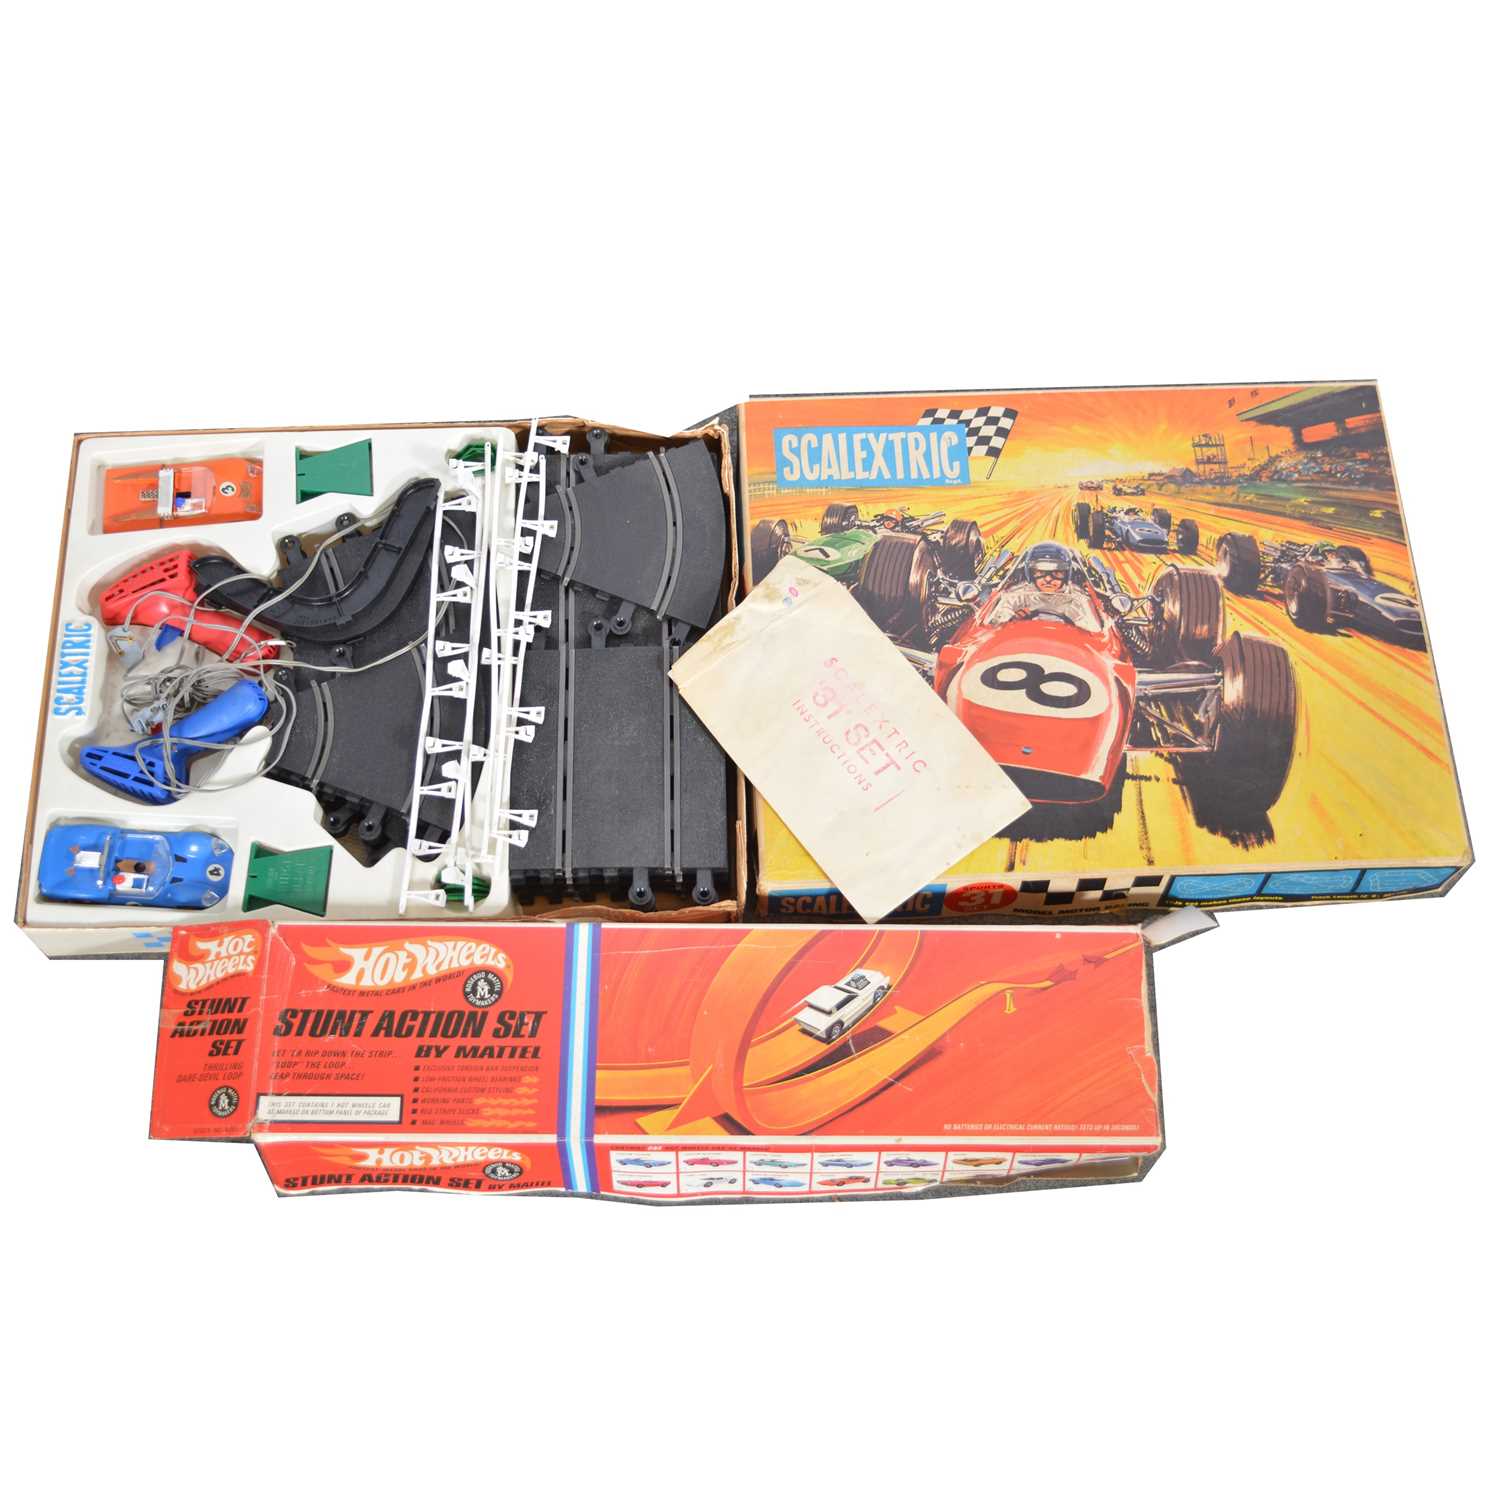 Lot 256 - Scalextric slot-car racing set 31 and Hotwheels Stunt Action set